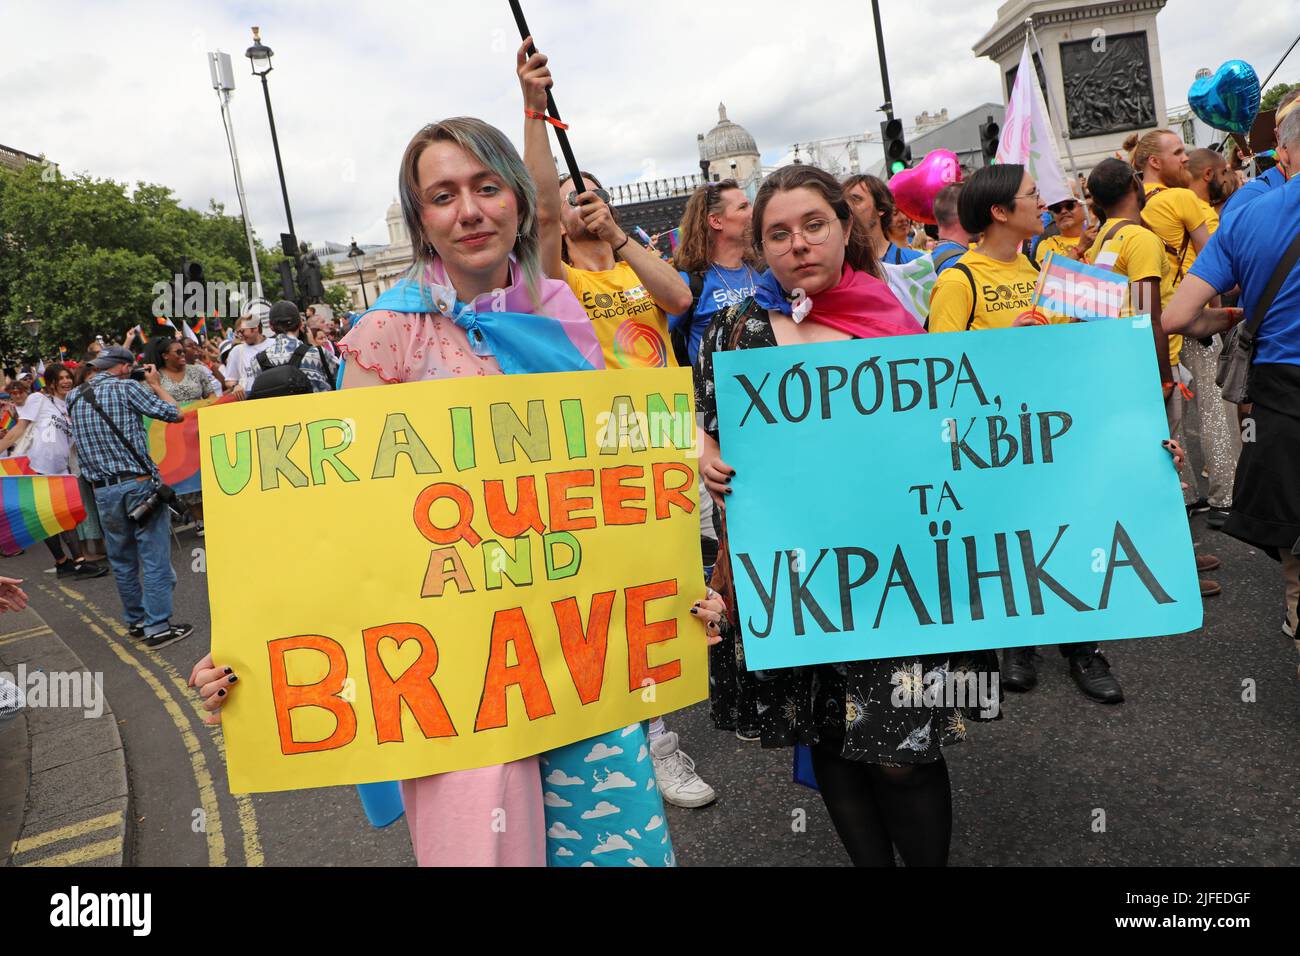 London, UK. 2nd July, 2022. Participants at the Pride in London Parade. More than 30,000 participants took part in the Pride Parade in London, celebrating 50 years of Pride and LGBT  protest. Credit: Paul Brown/Alamy Live News Stock Photo